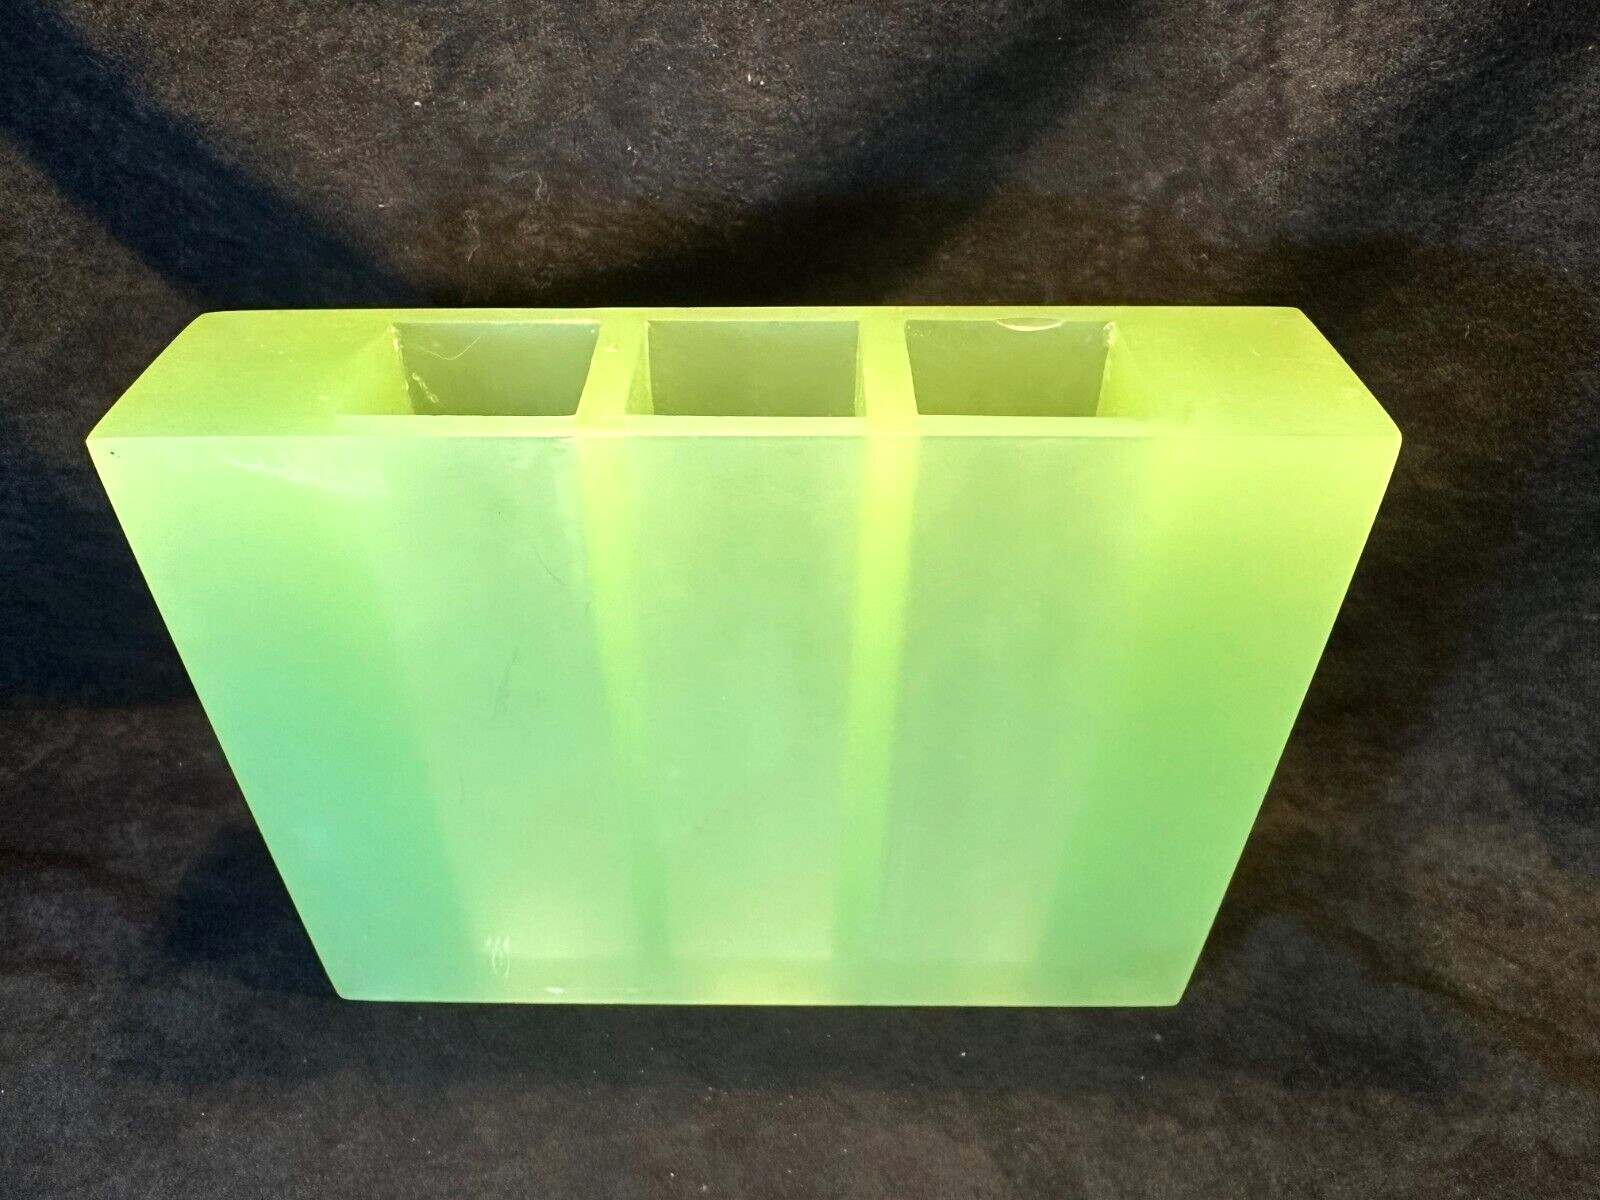 Wingard Light Frosted Green Solid Resin Block Multi Vase